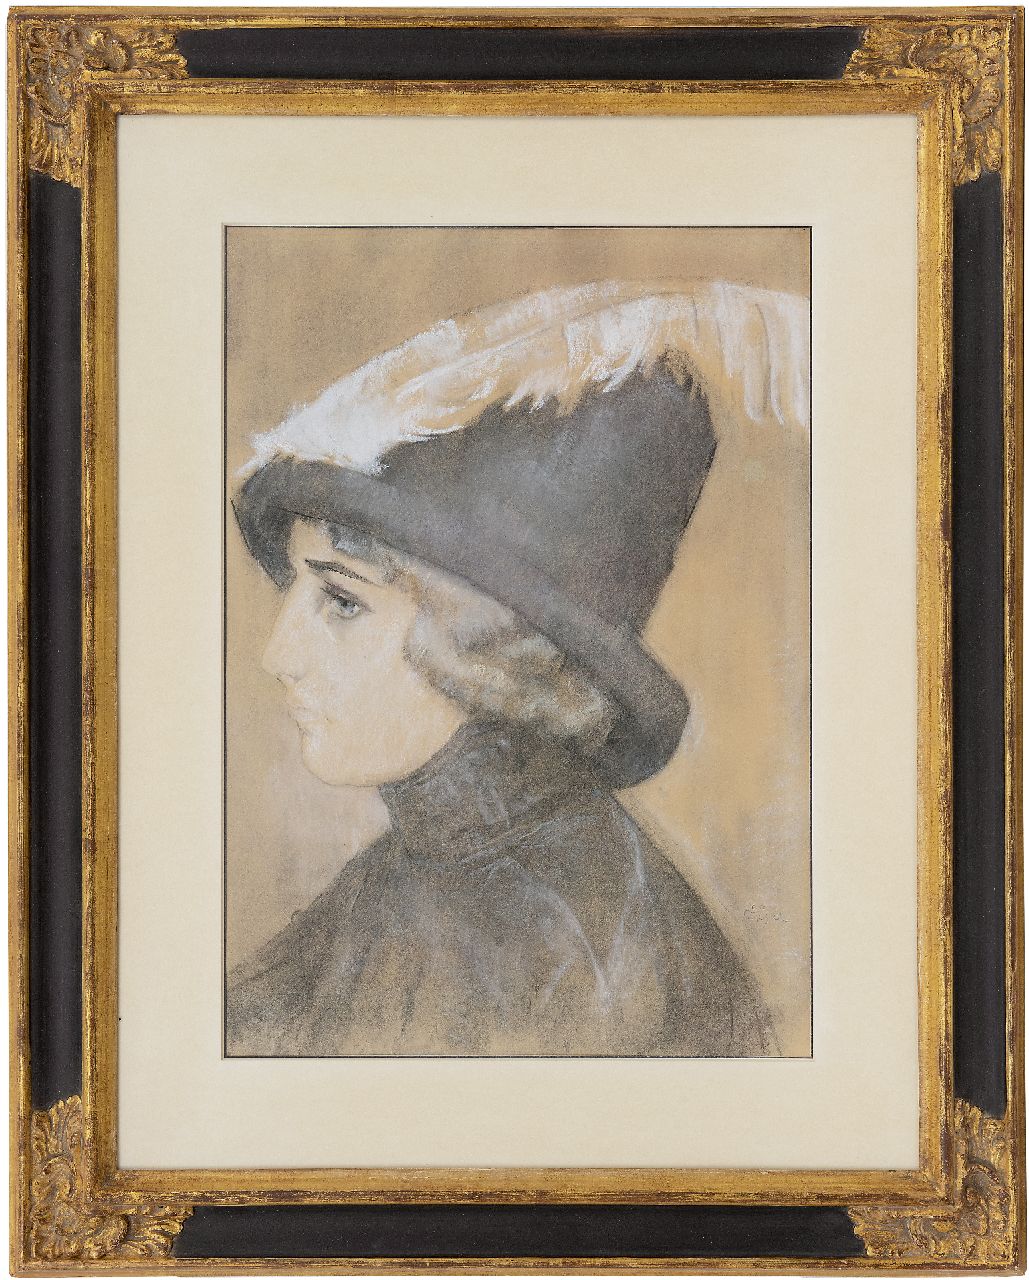 Gestel L.  | Leendert 'Leo' Gestel, Portrait of a lady with a hat, chalk on paper 47.0 x 33.5 cm, signed l.r. and painted ca. 1910-1911